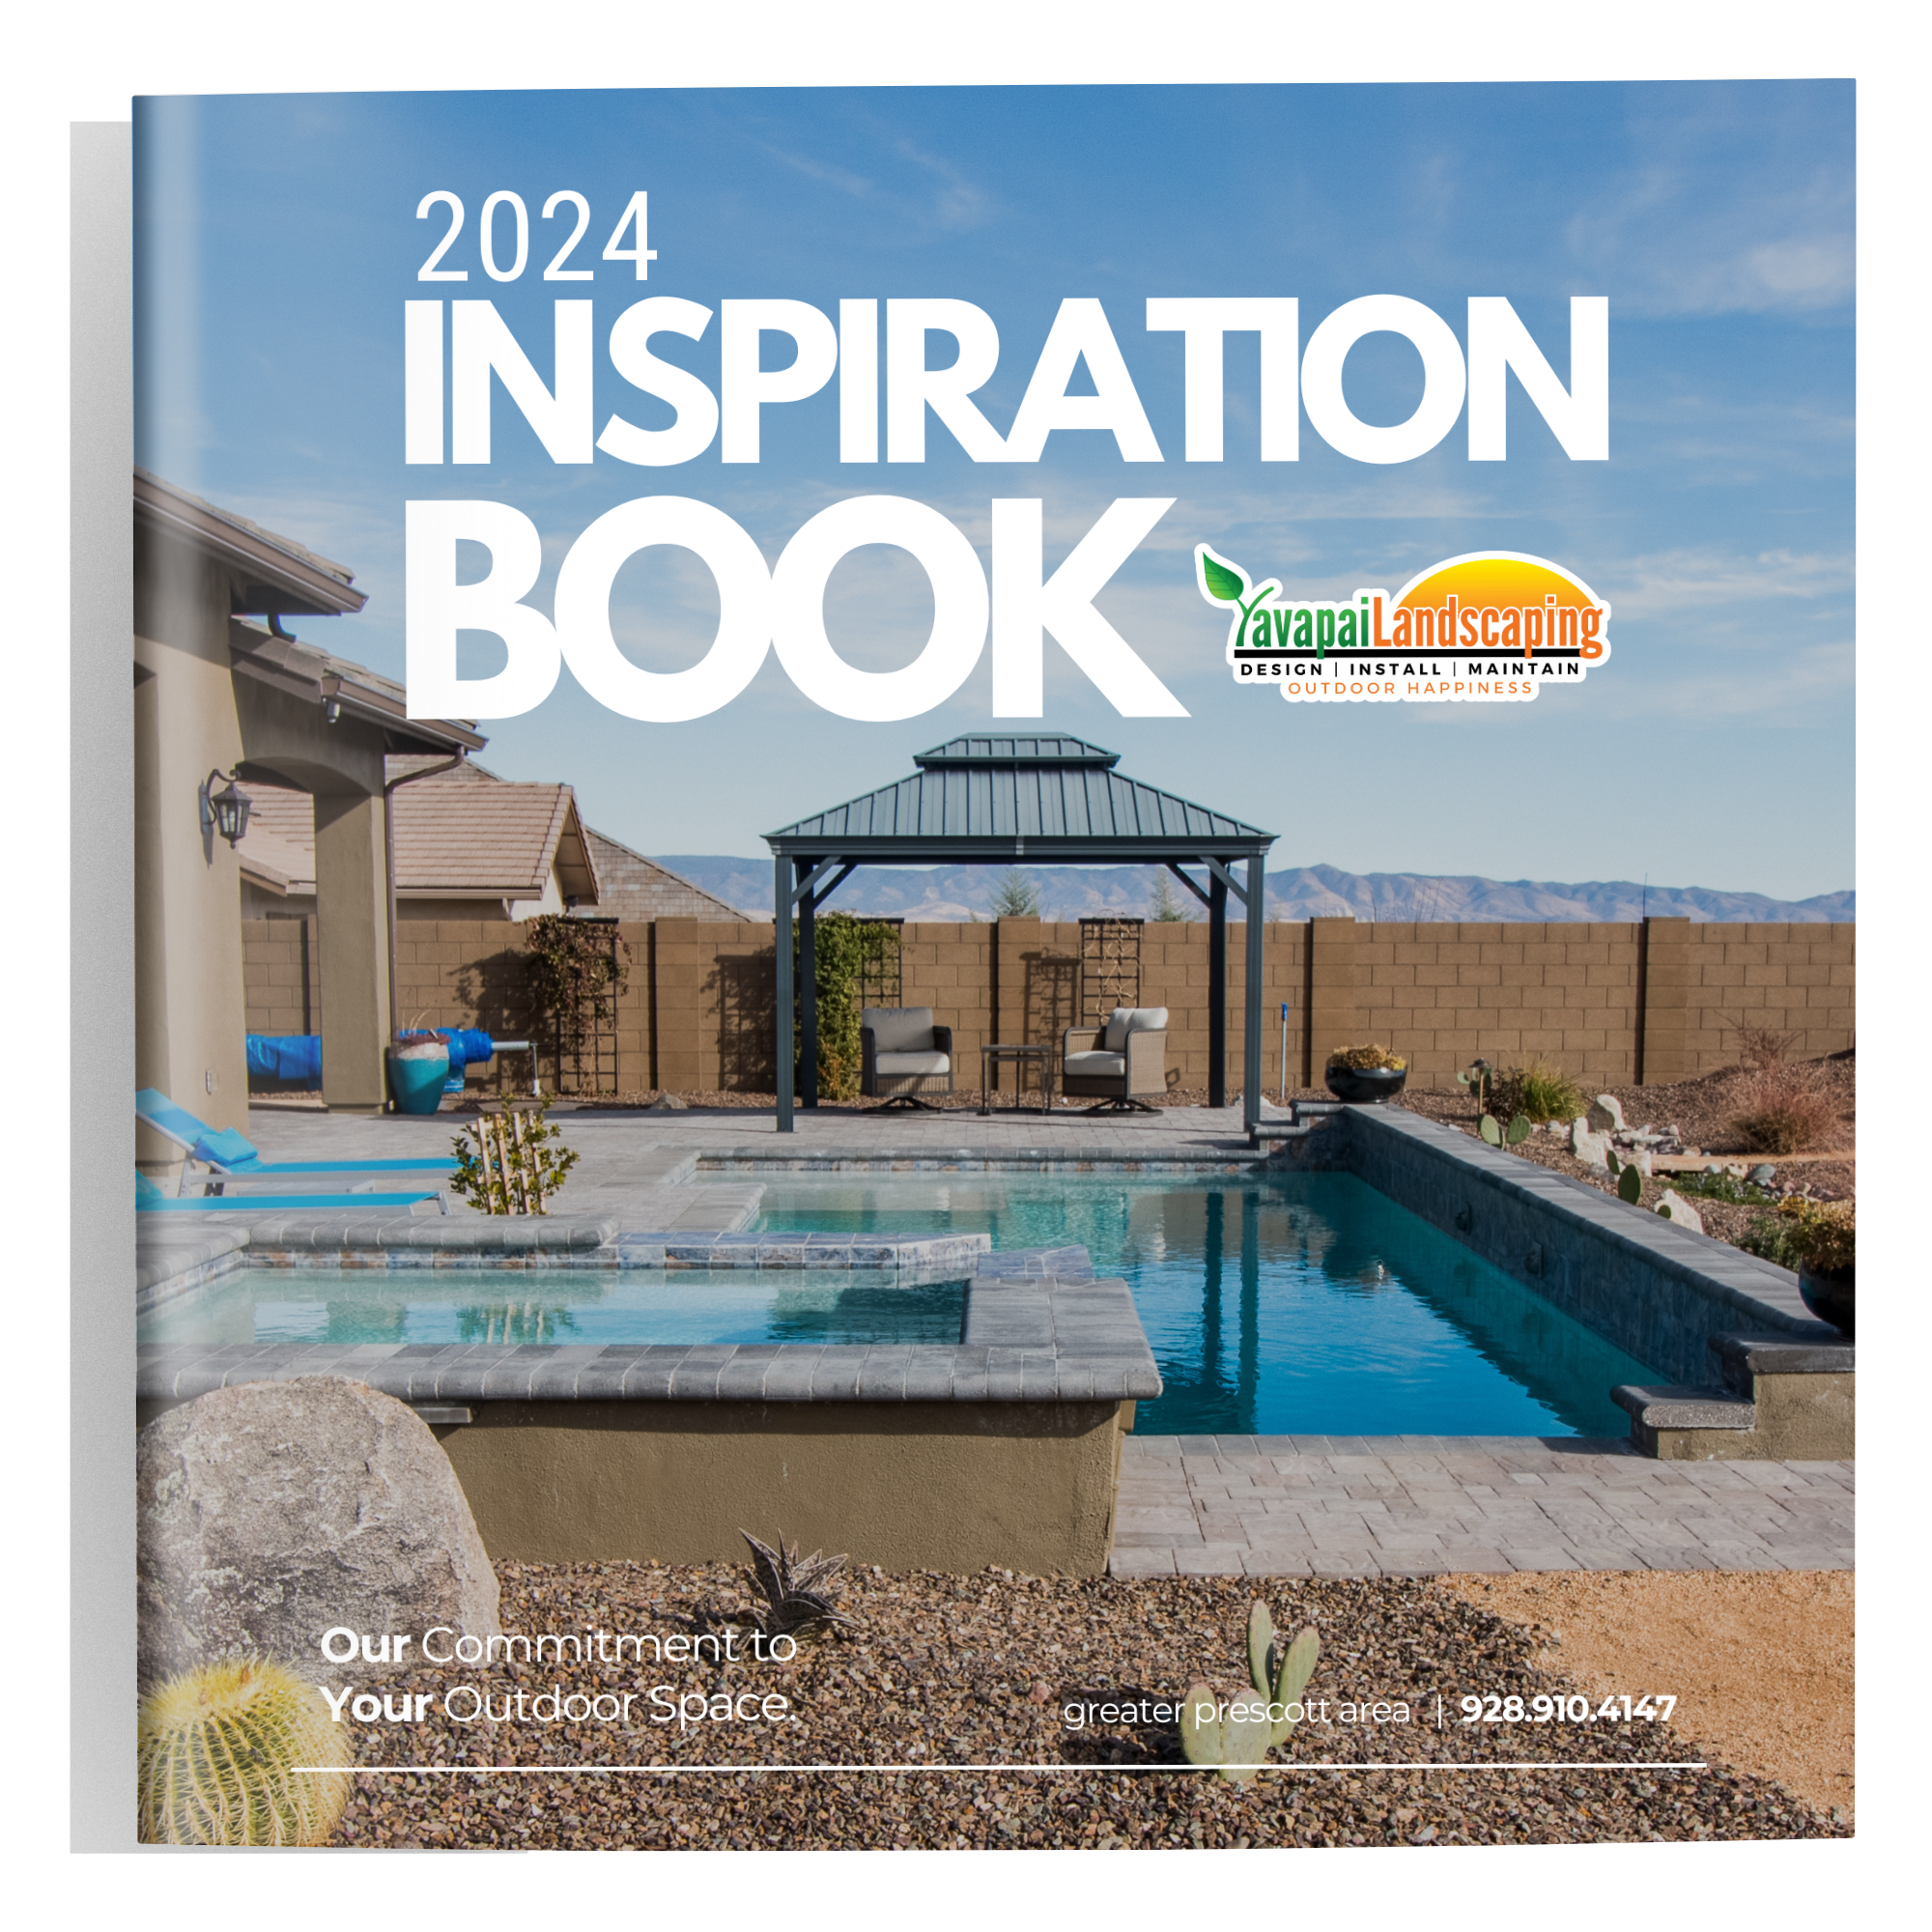 A cover image of the "2024 Inspiration Book" by Yavapai Landscaping, a renowned Prescott Landscaping Company. It features a landscaped backyard with a swimming pool, a shaded seating area, and a mountainous backdrop. The text highlights the company's commitment to outdoor spaces and provides a contact number.